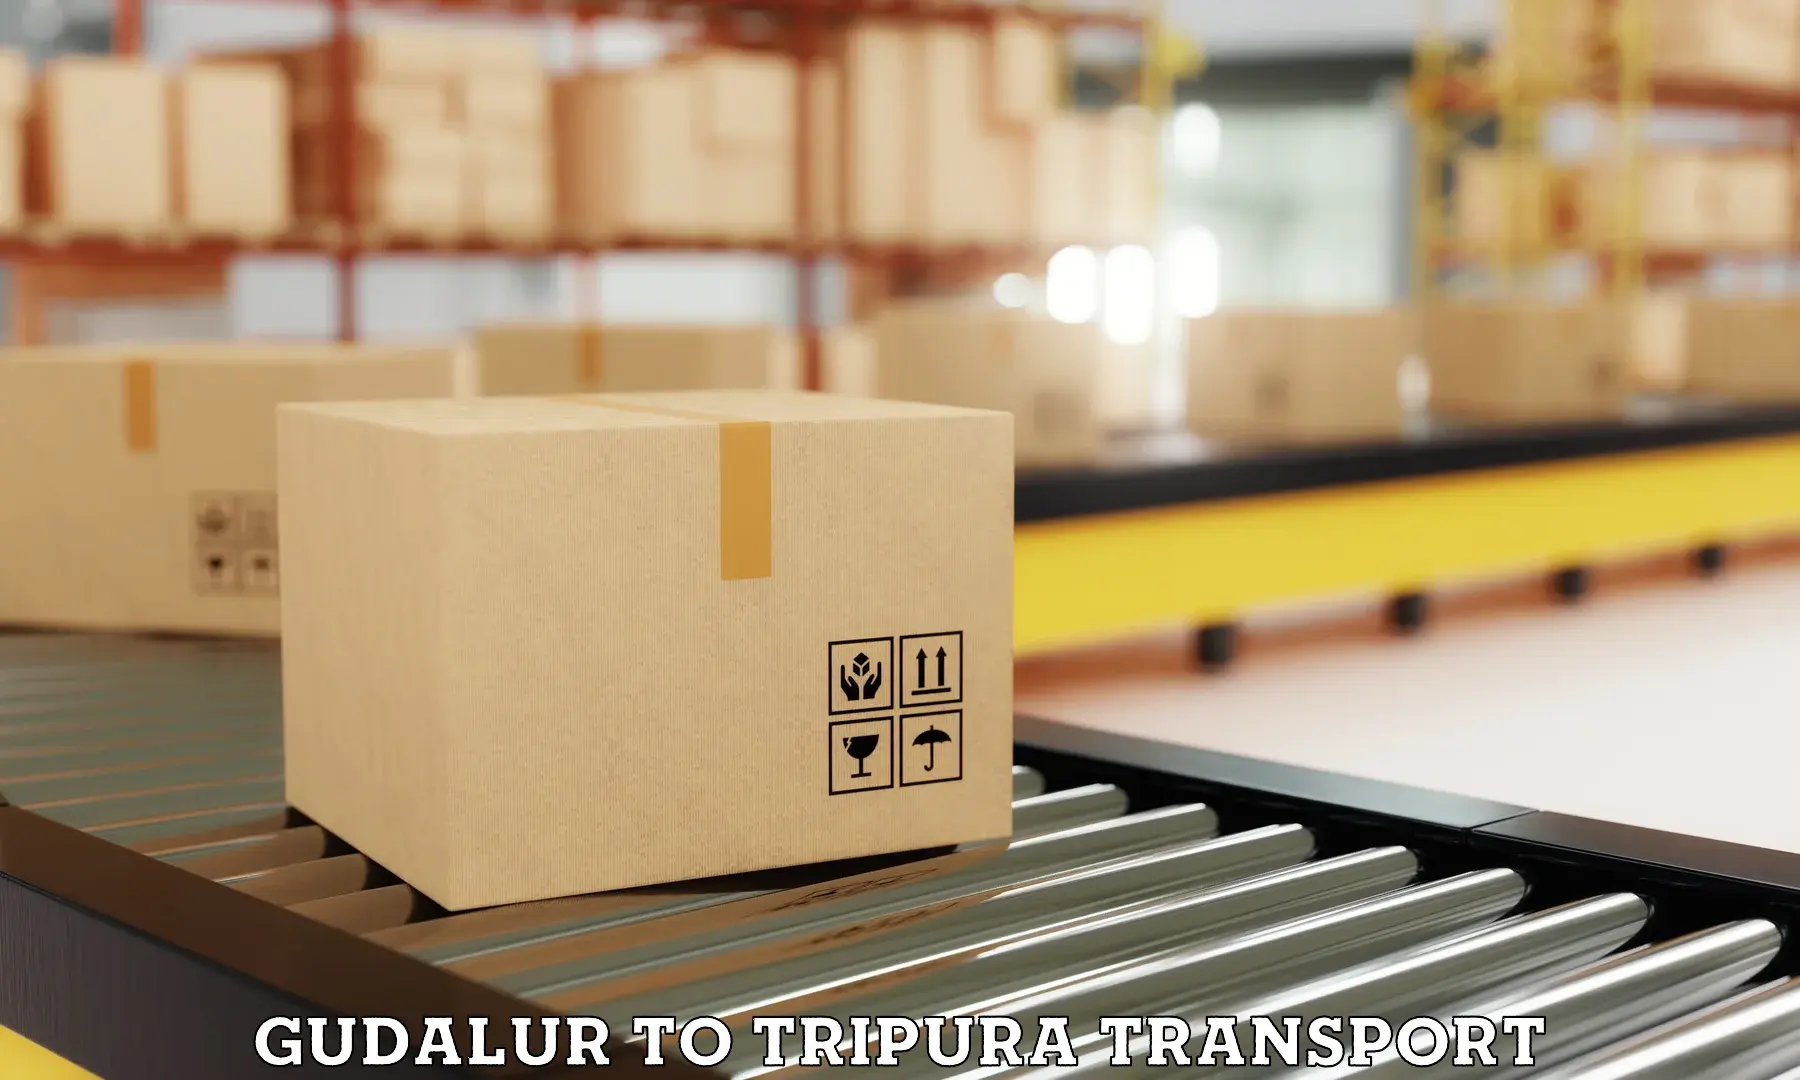 Daily parcel service transport Gudalur to Udaipur Tripura